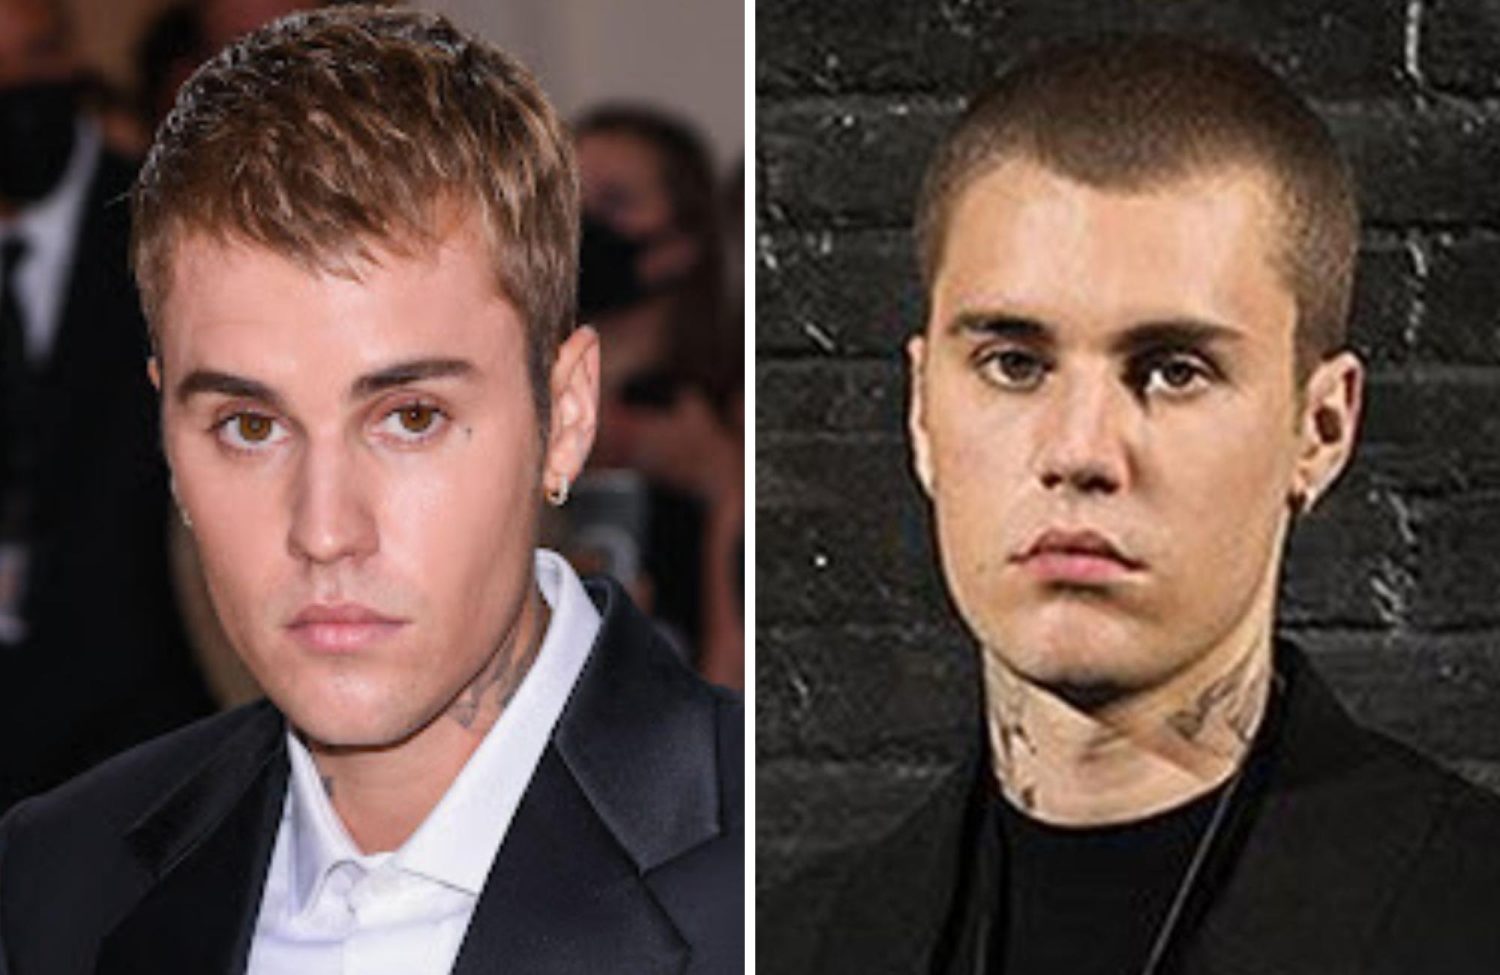 Justin Bieber's Priest Transformation Has Fans In Awe